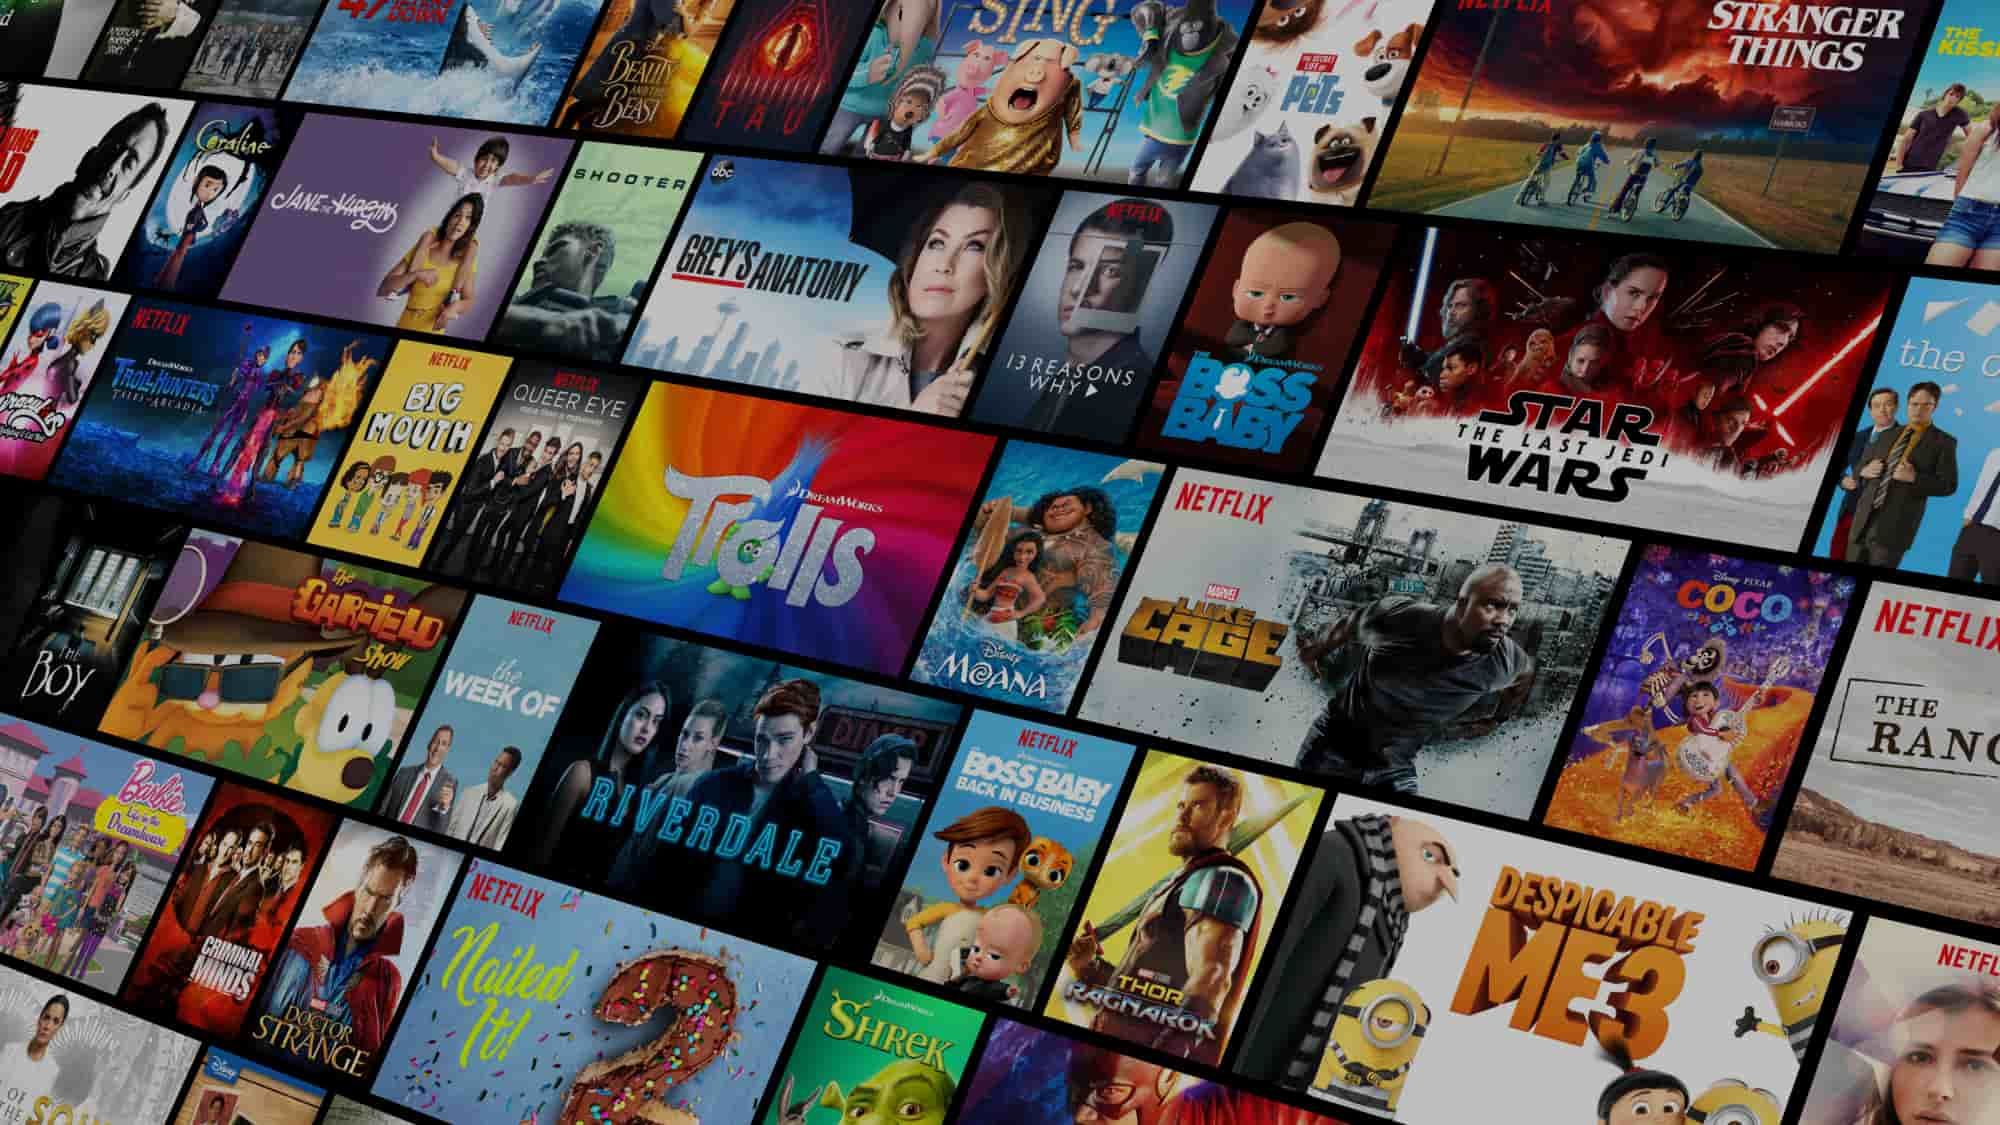 Streaming TV Shows On Netflix, IFVOD And Amazon Prime Is A Thing Now